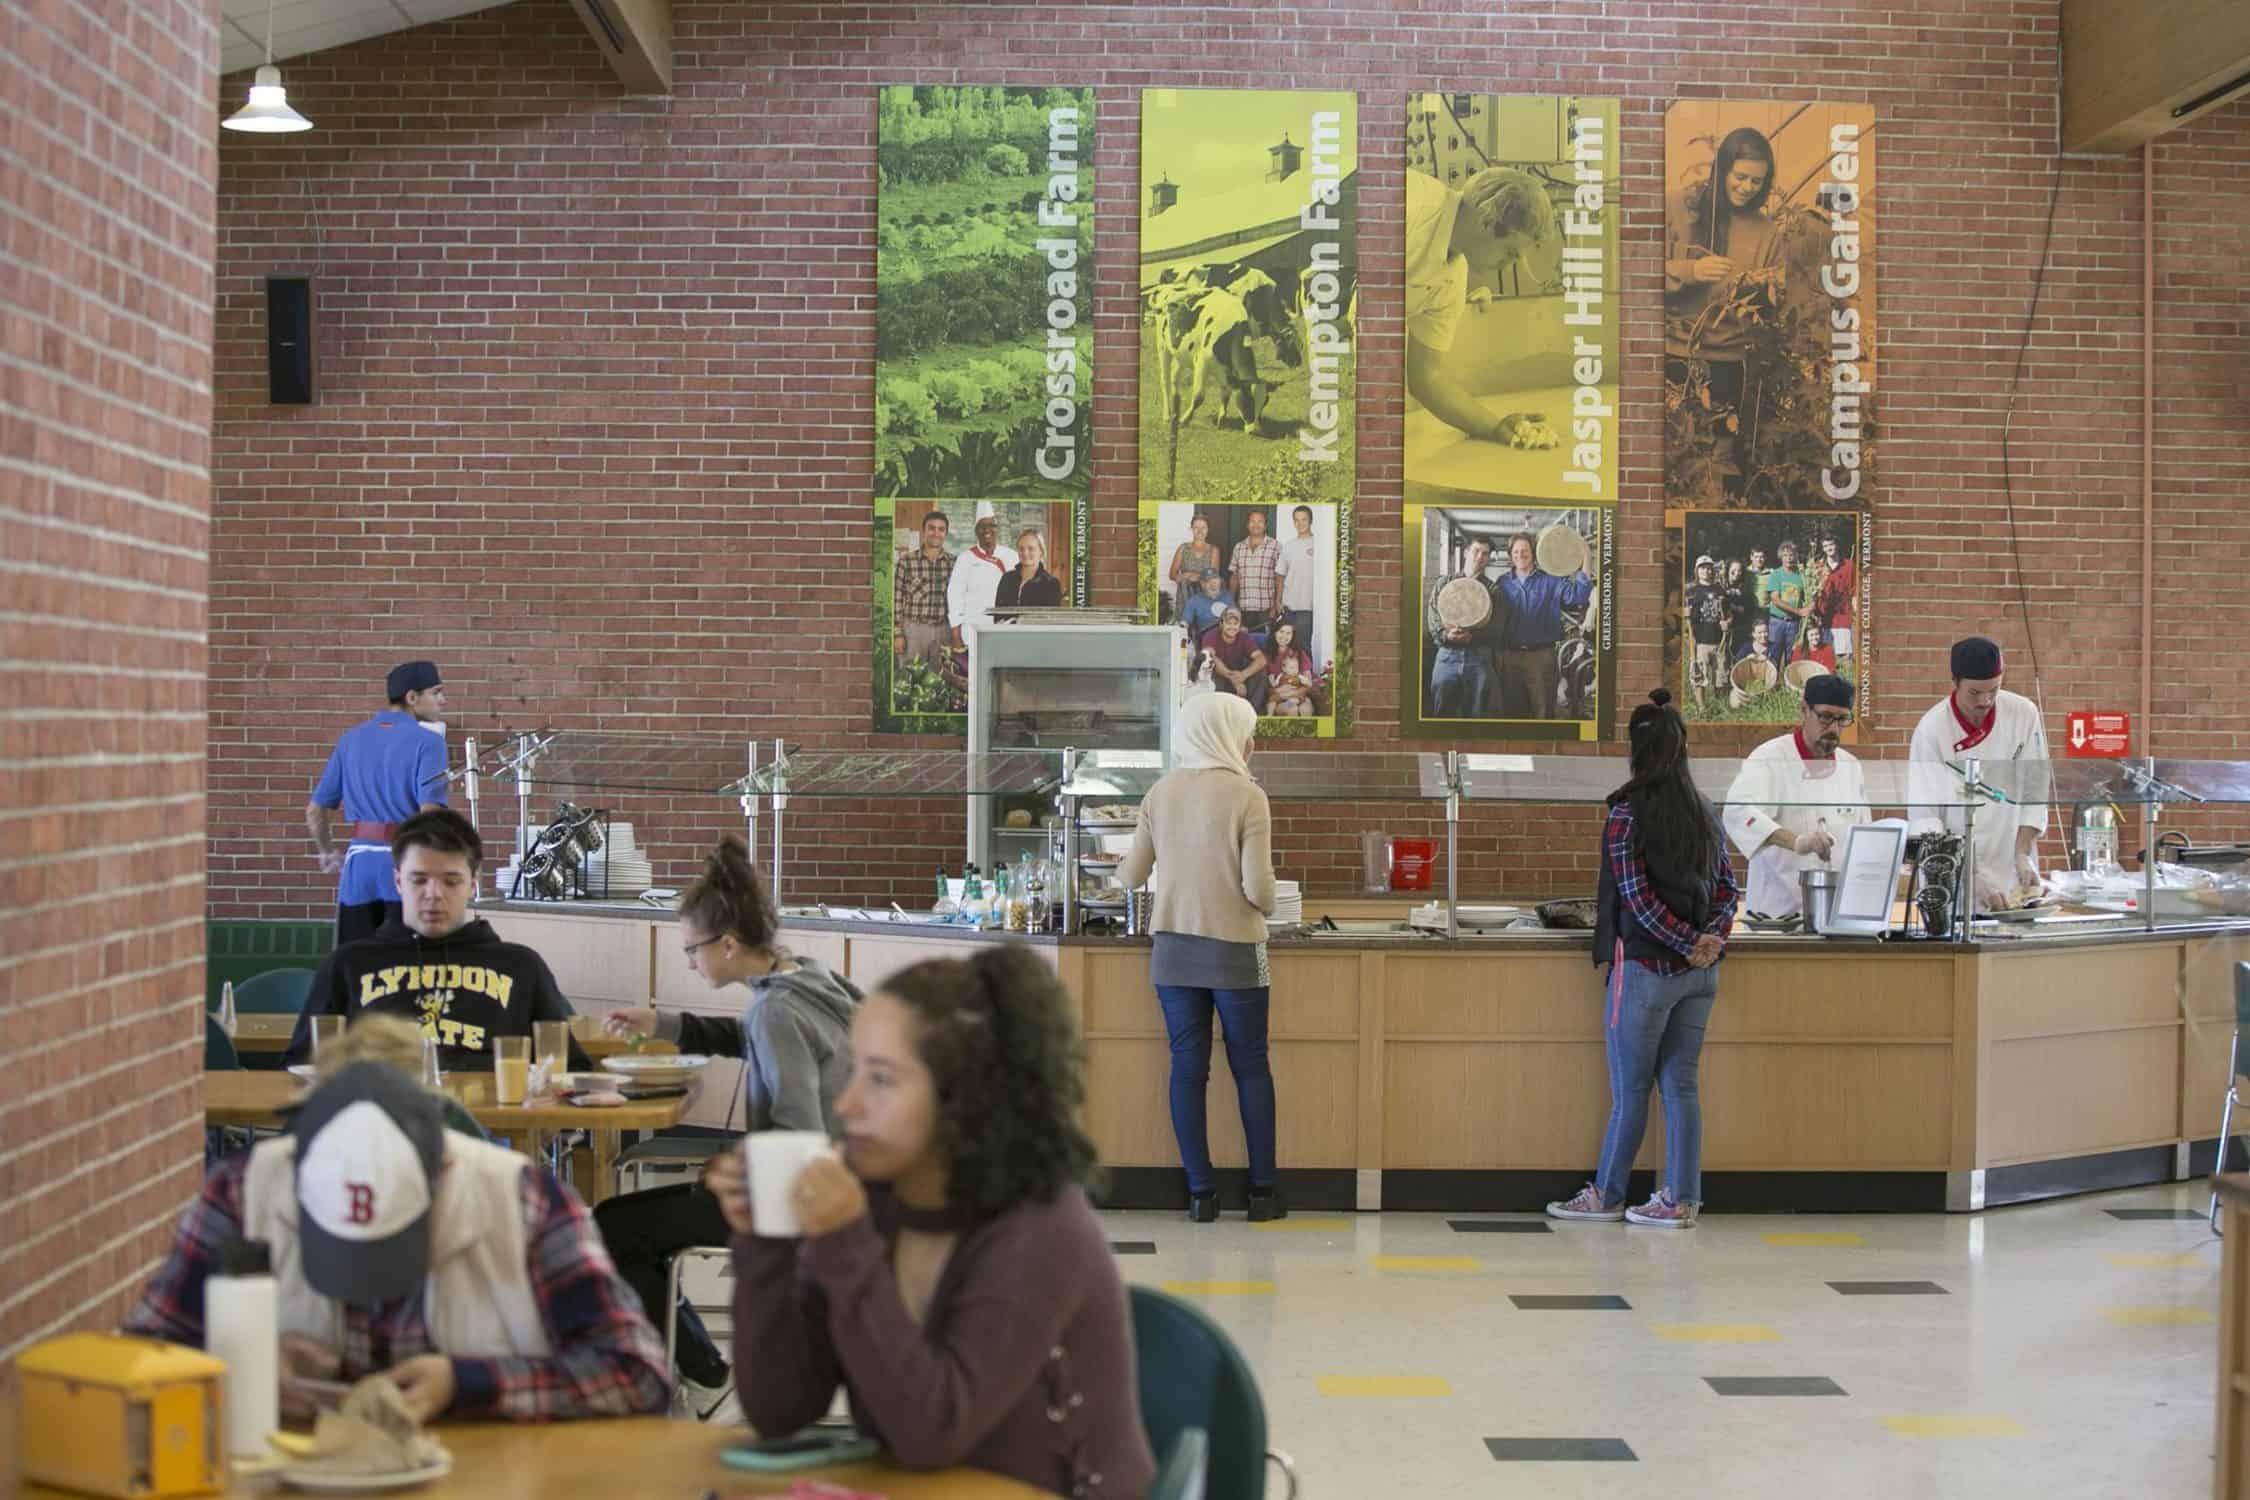 The dining hall offers a variety of meal choices and plenty of seating